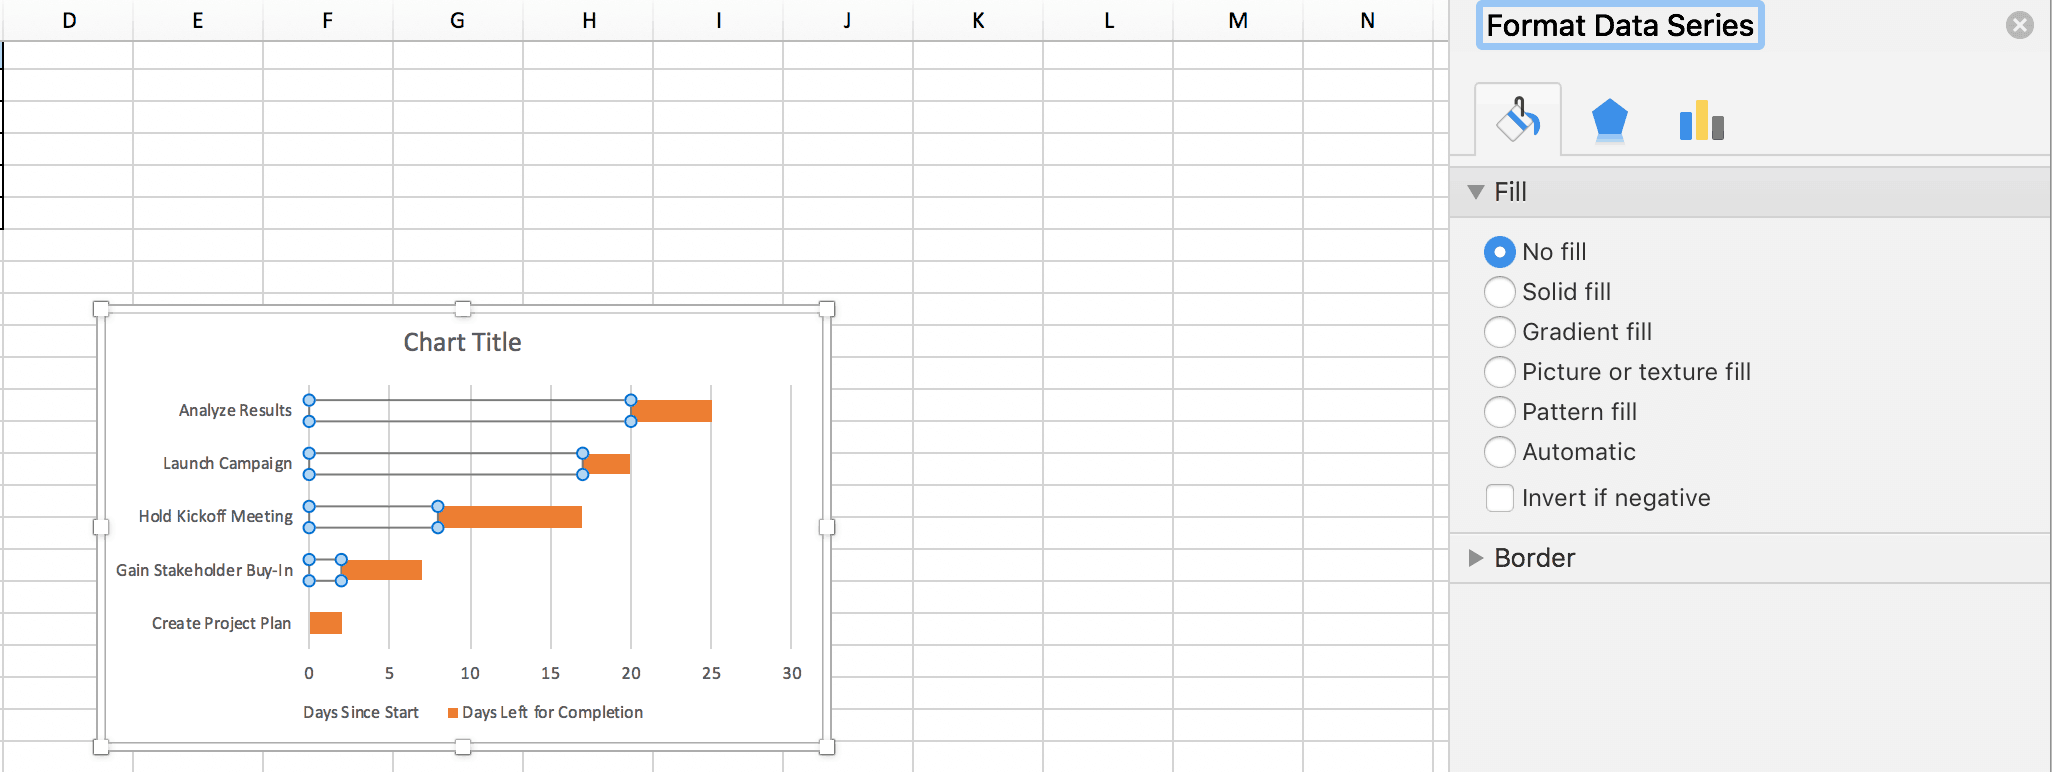 Example of how to format the bars in an Excel Gantt chart